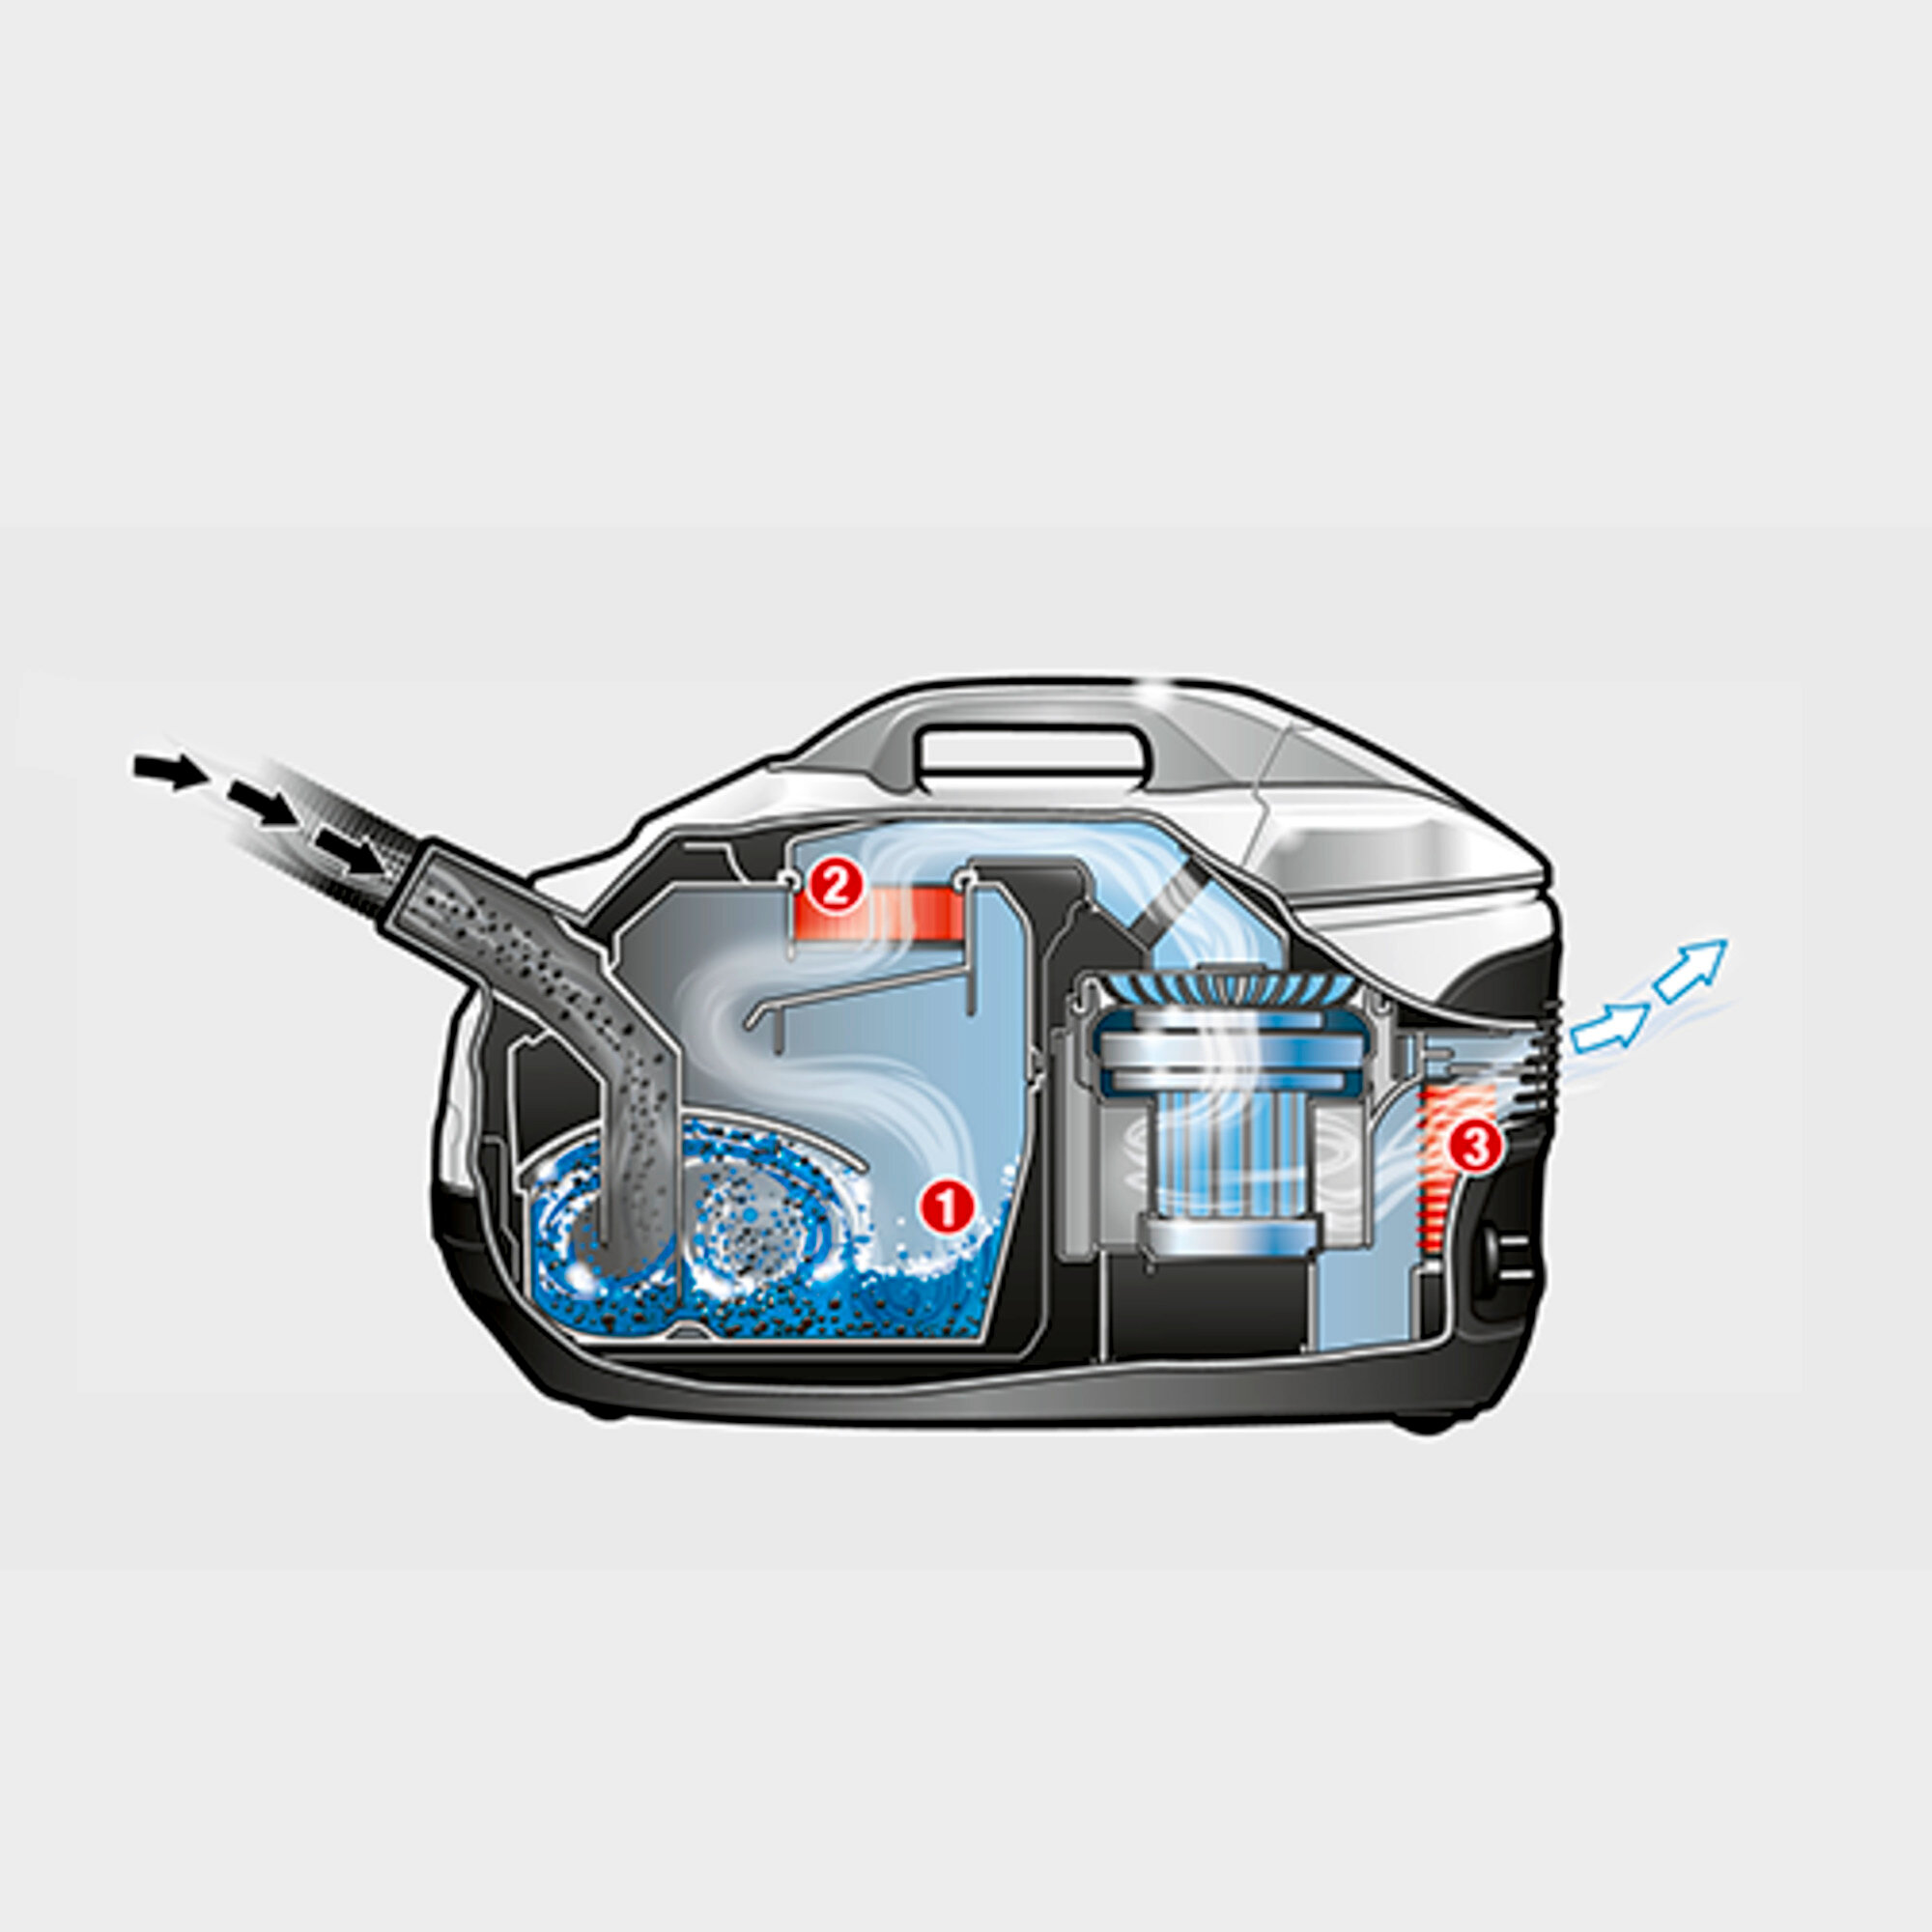 Water filter vacuum cleaner DS 6.000 Mediclean *SEA: Multi-stage filter system, consisting of an innovative water-filter, washable intermediate filter, and a HEPA 13 filter (EN1822:1998)